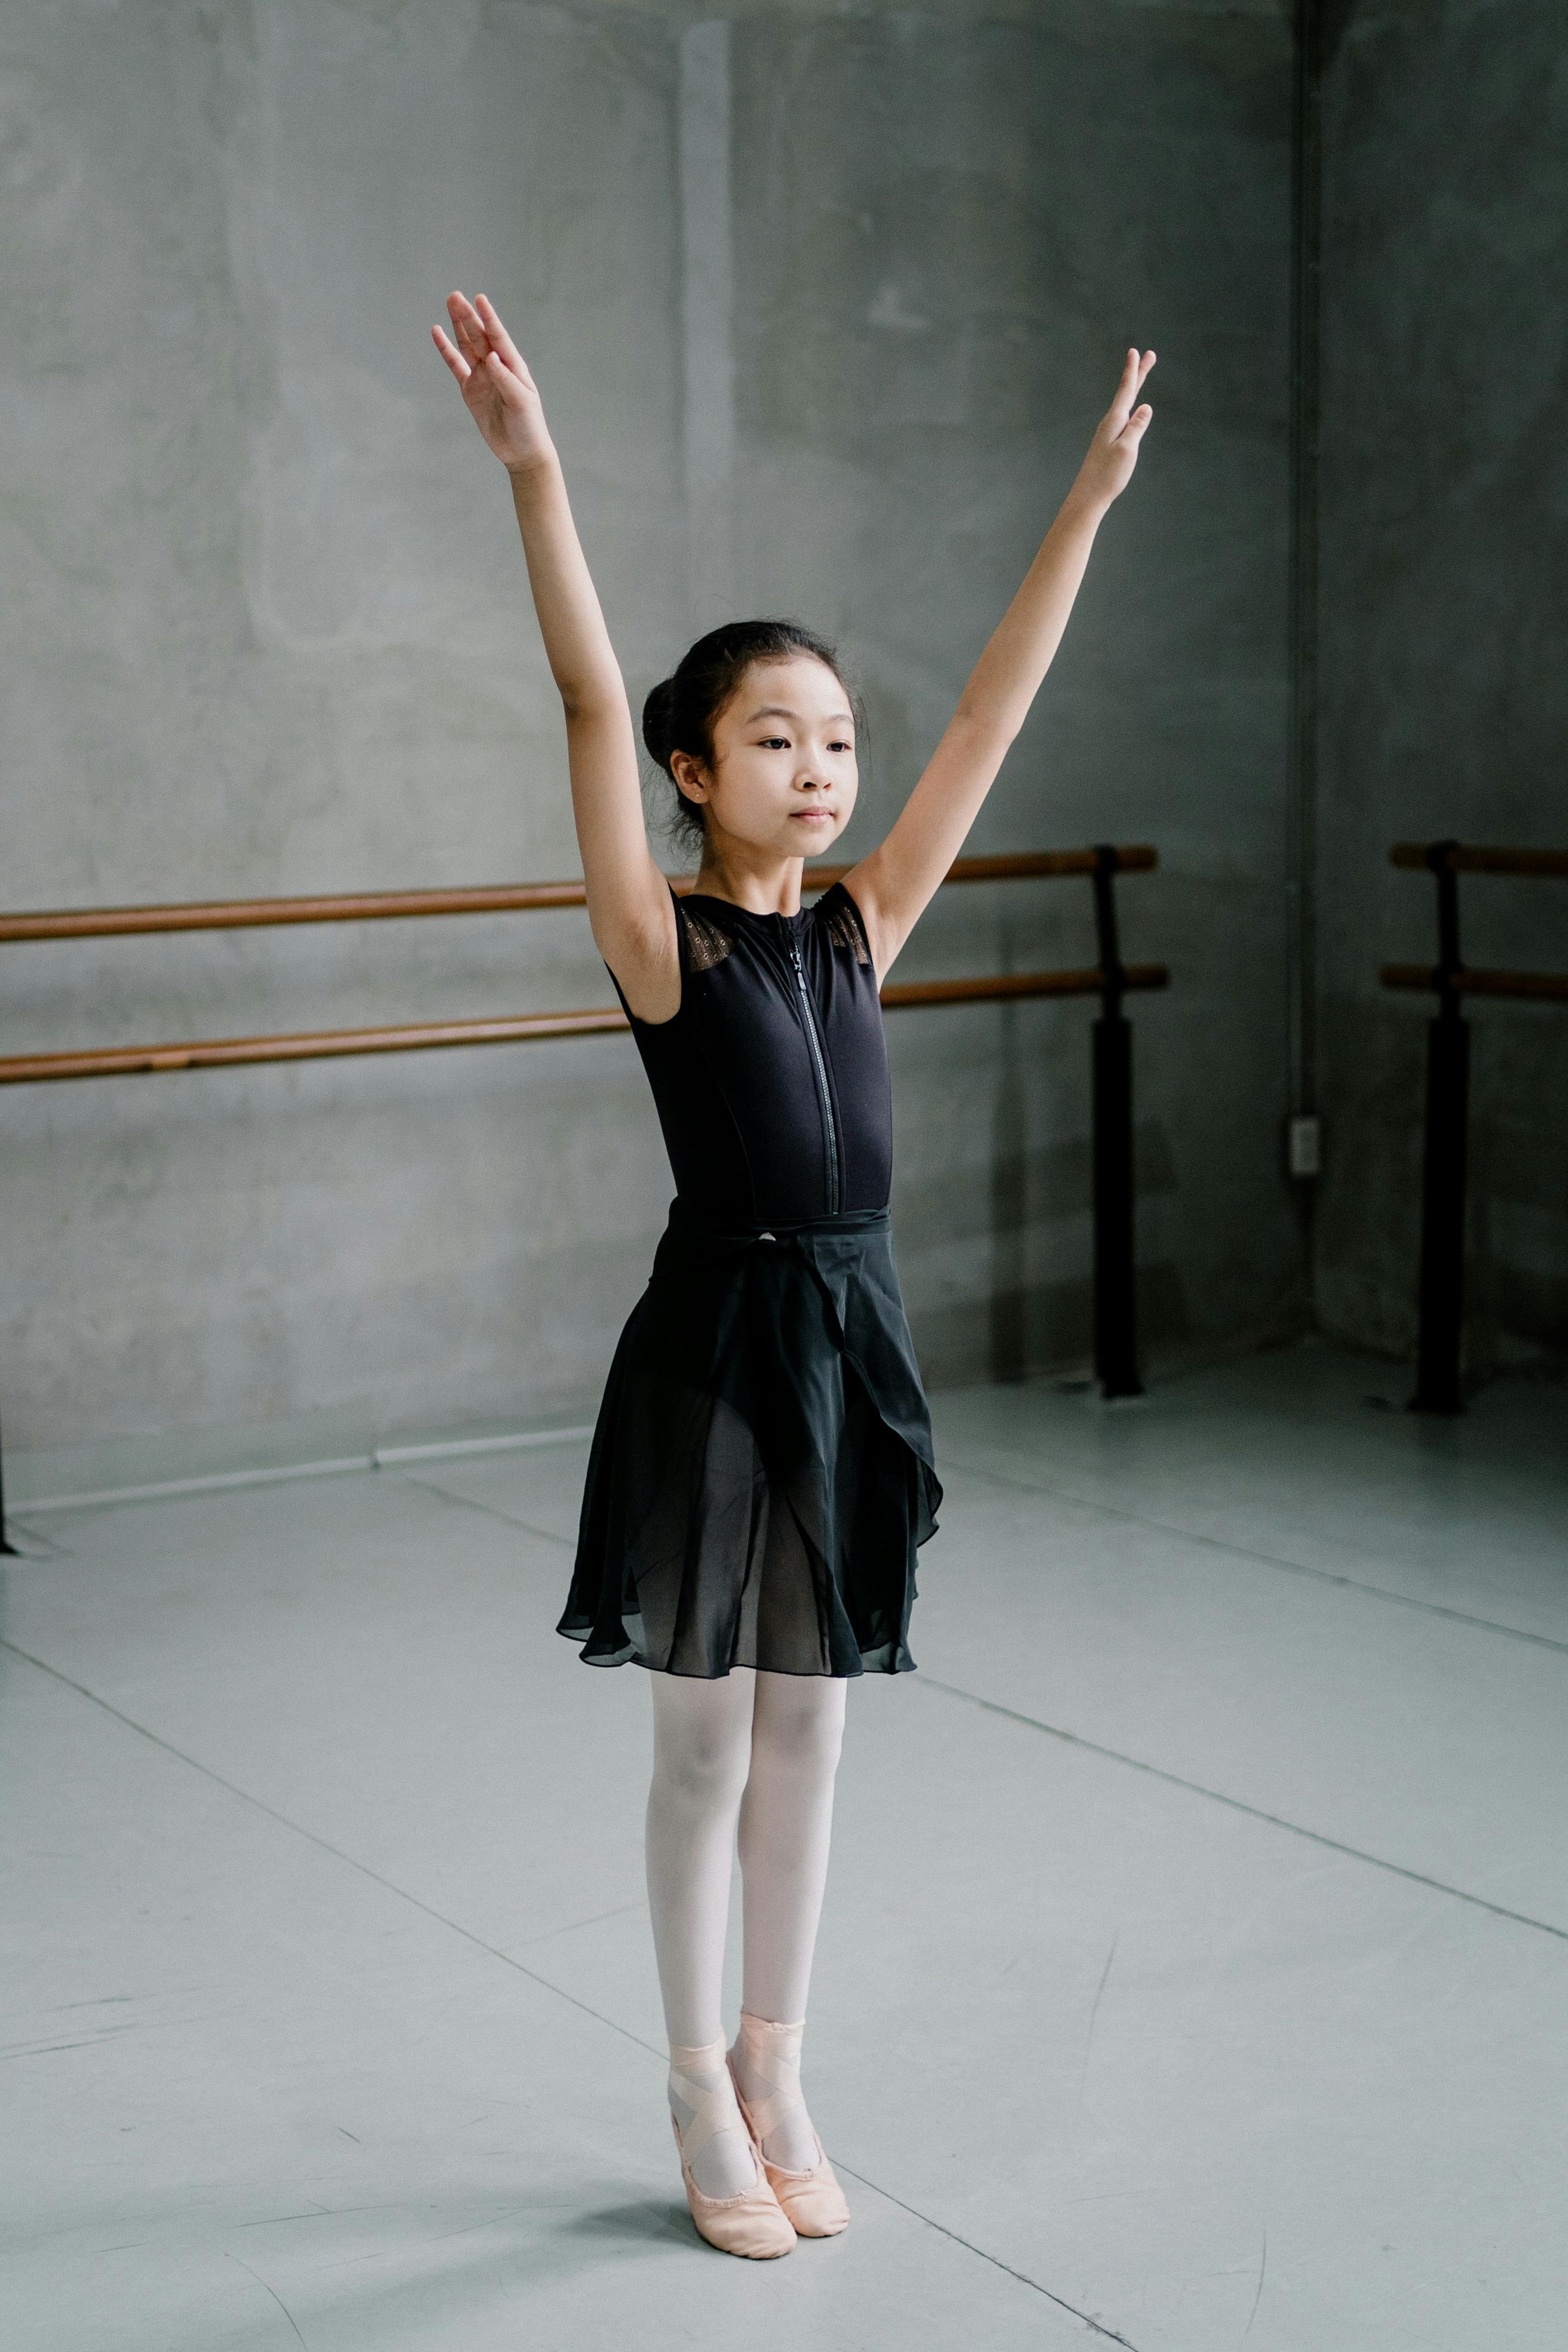 Asian girl ballerina standing with arms raised in studio · Free Stock Photo